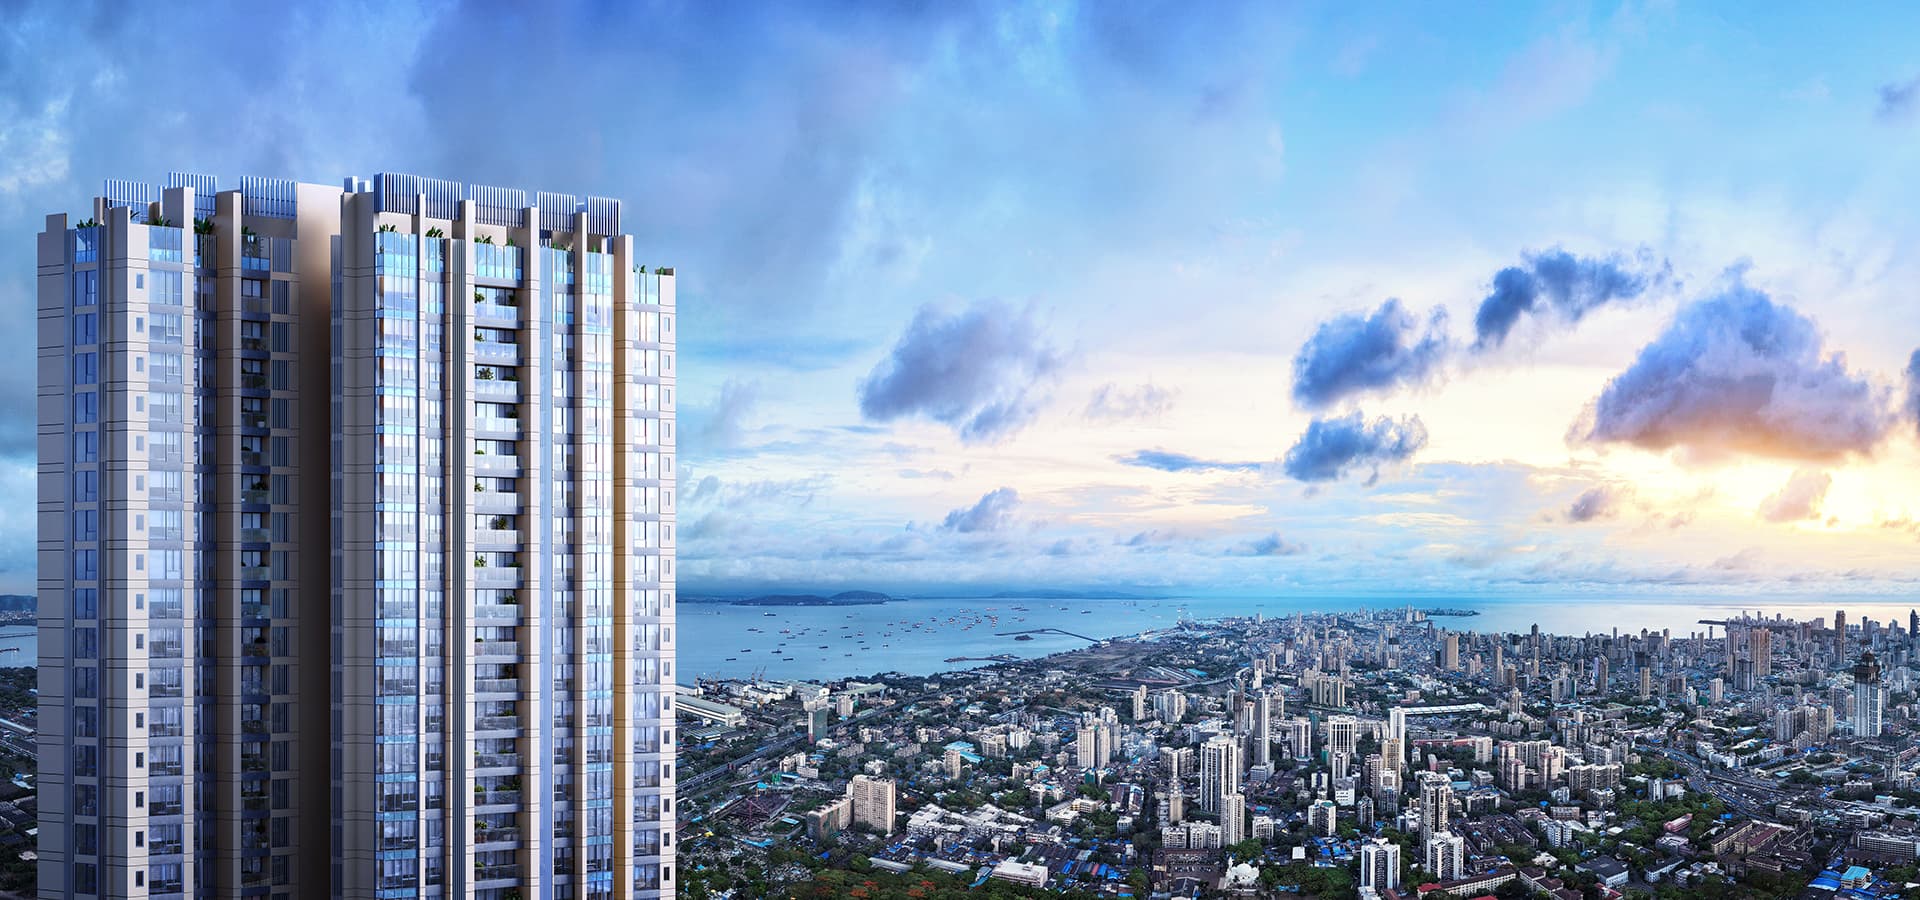 Real estate builders - Piramal Aranya's exterior showcases a stunning day elevation view with the Arabian Sea.